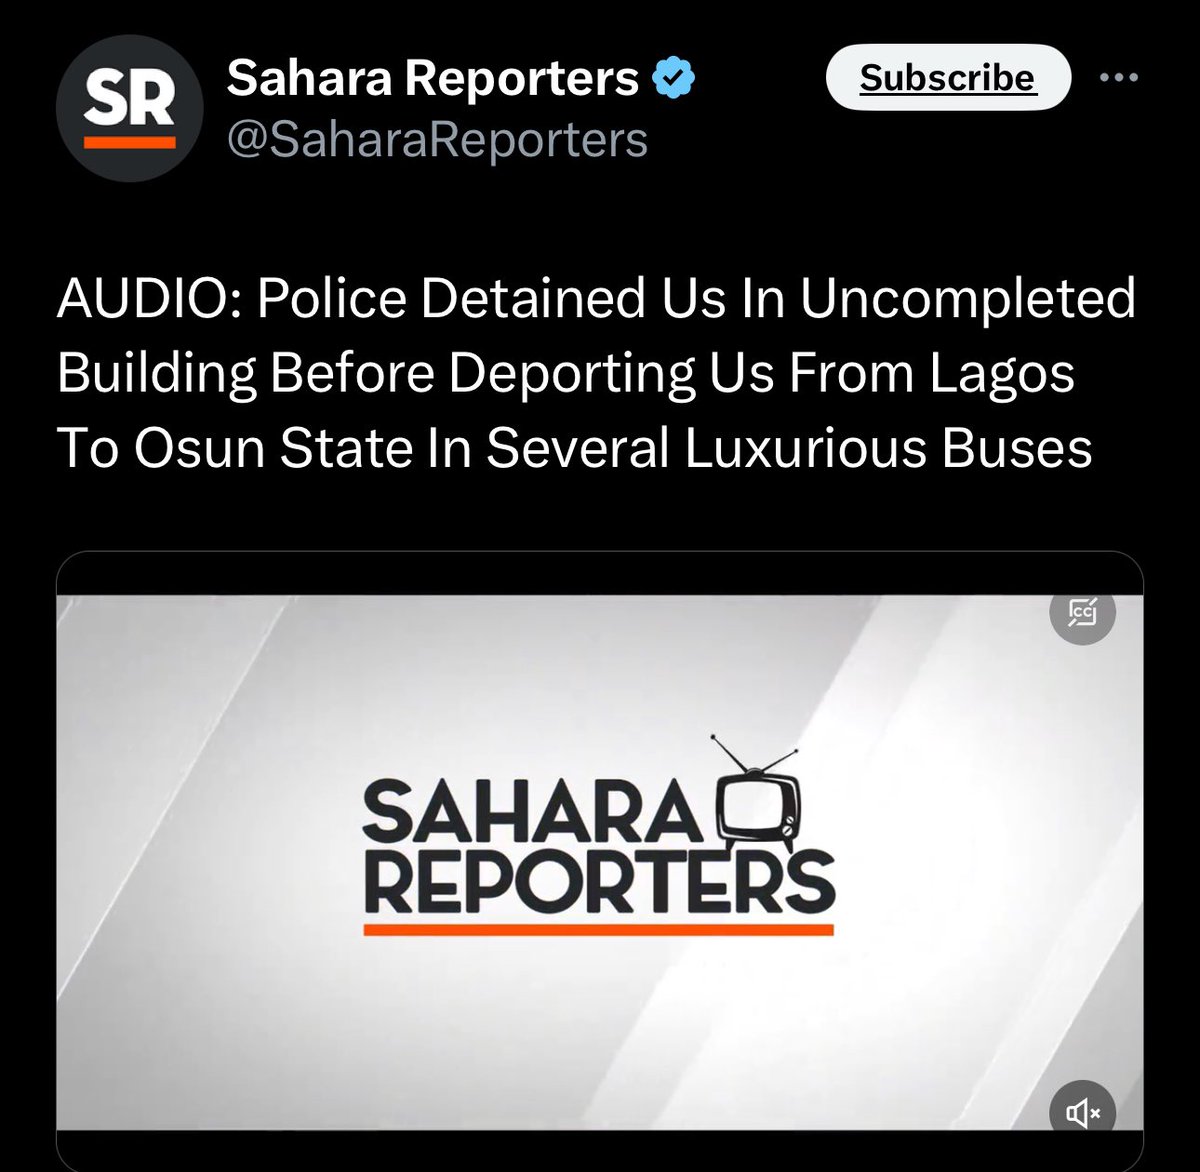 I hope this is not a way of securing justification for an impending mass deportation of Igbos from Lagos? Deporting Yorubas to Osun and hyping it out of control is as weird as it is suspicious. You know, like I’ve always said in the past, whenever the colonials run out of ideas…